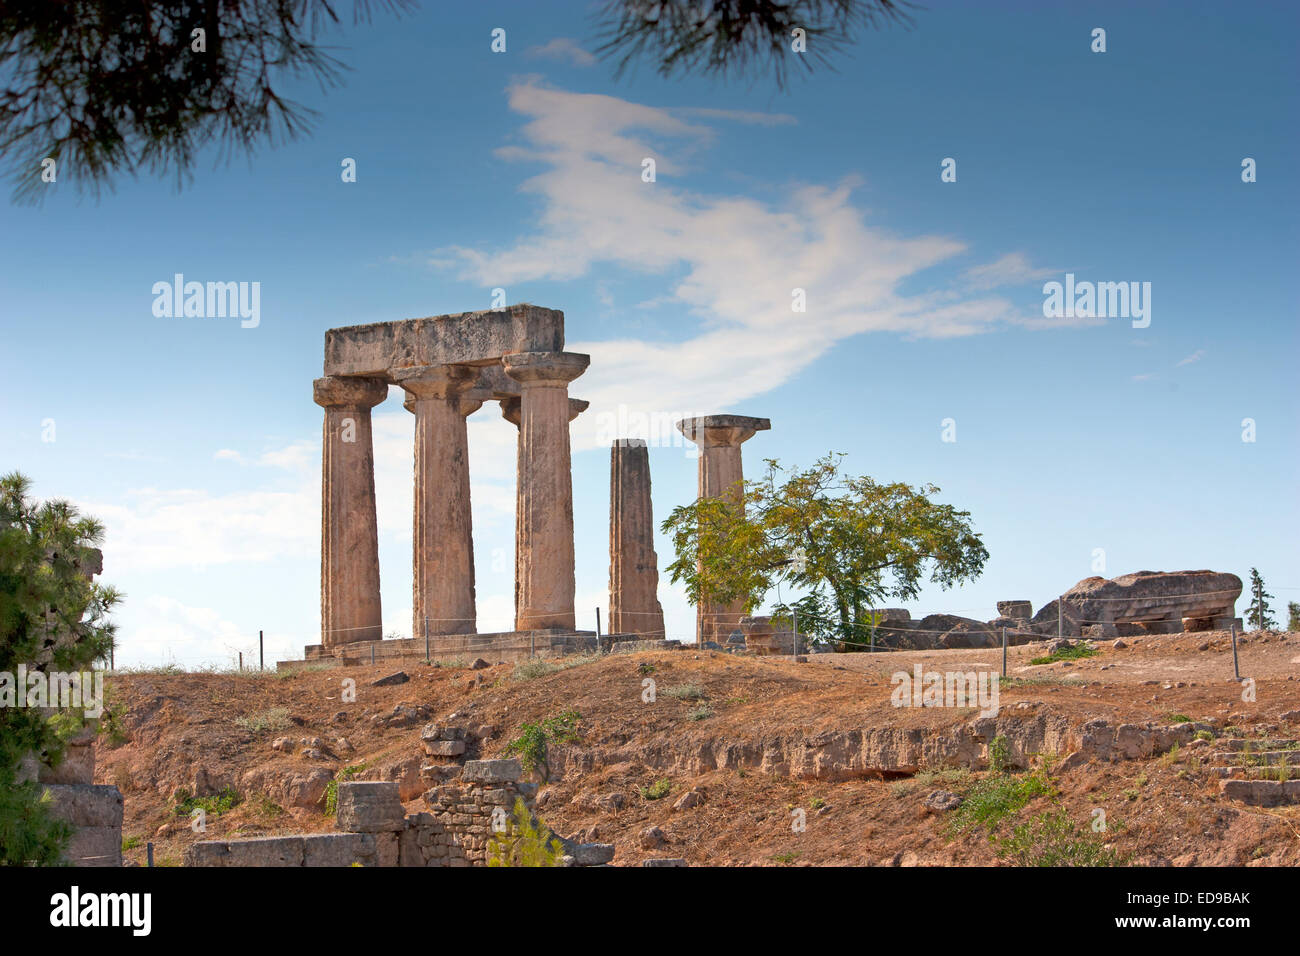 Temple of Apollo at Ancient Corinth, the Peloponnese, Greece Stock Photo